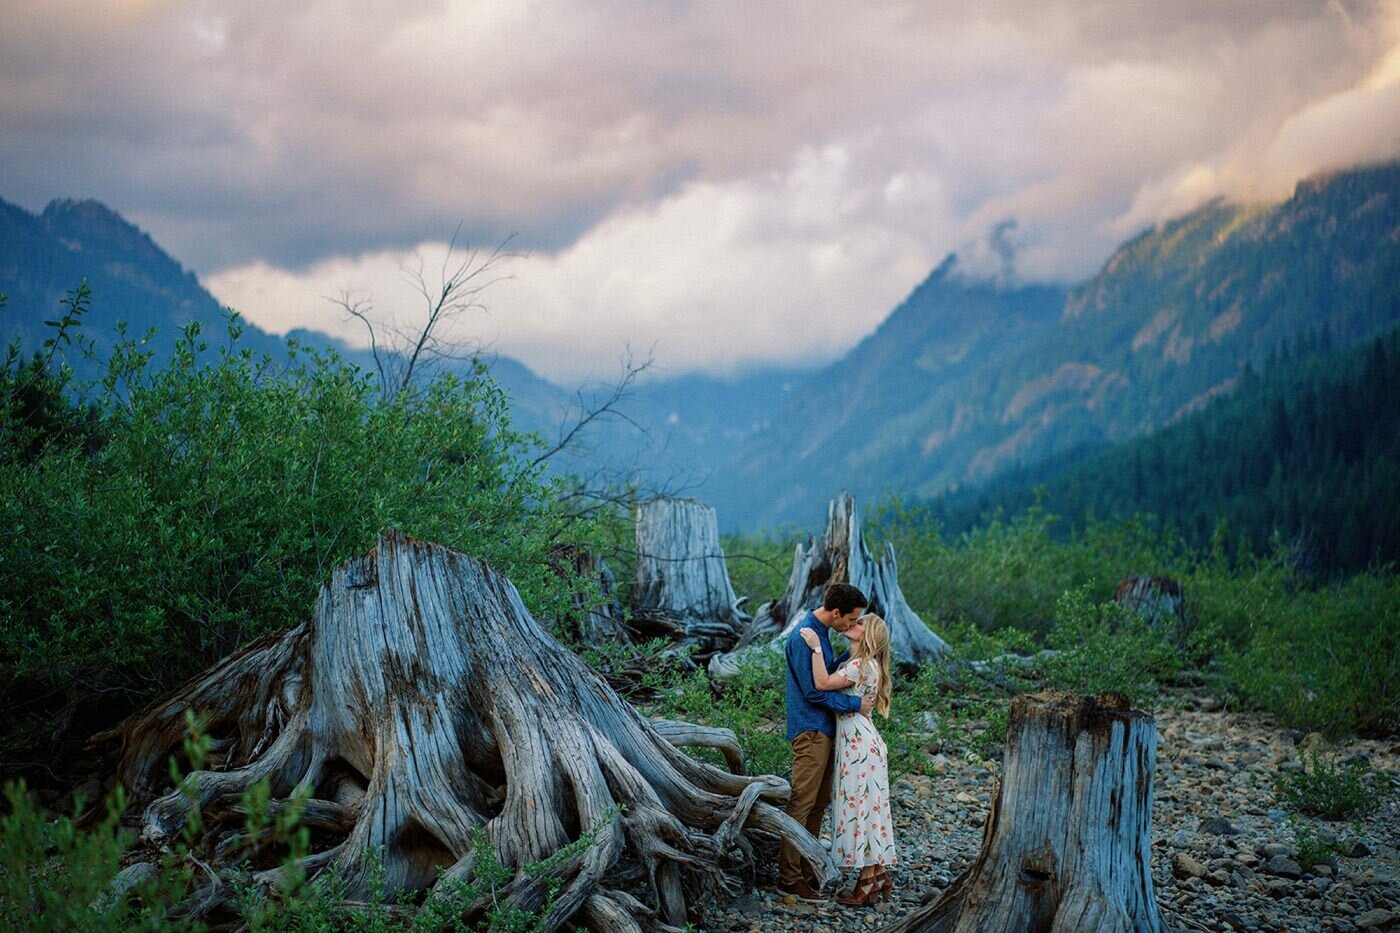 034_franklin falls and snoqualmie pass engagement session locations by ryan flynn.jpg